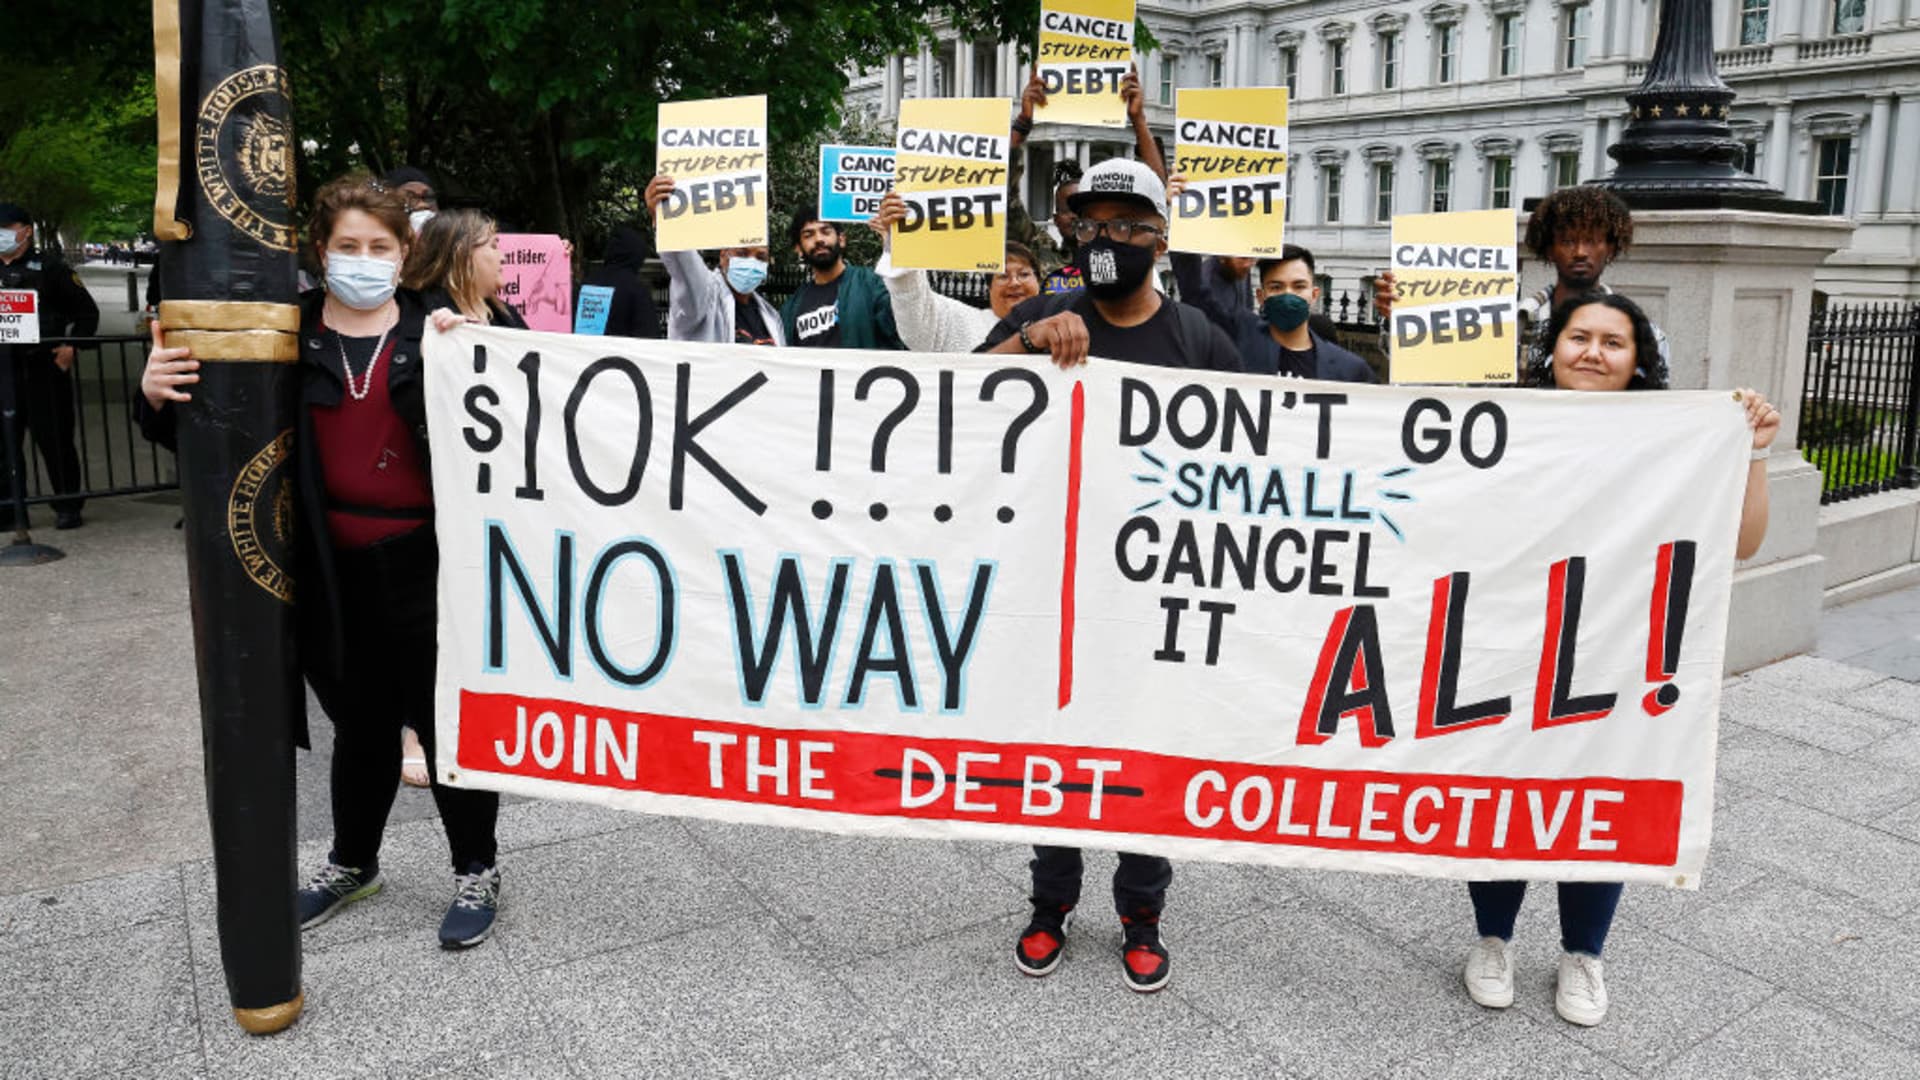 Critics Say Cancelling Student Loan Debt Is Bad Policy